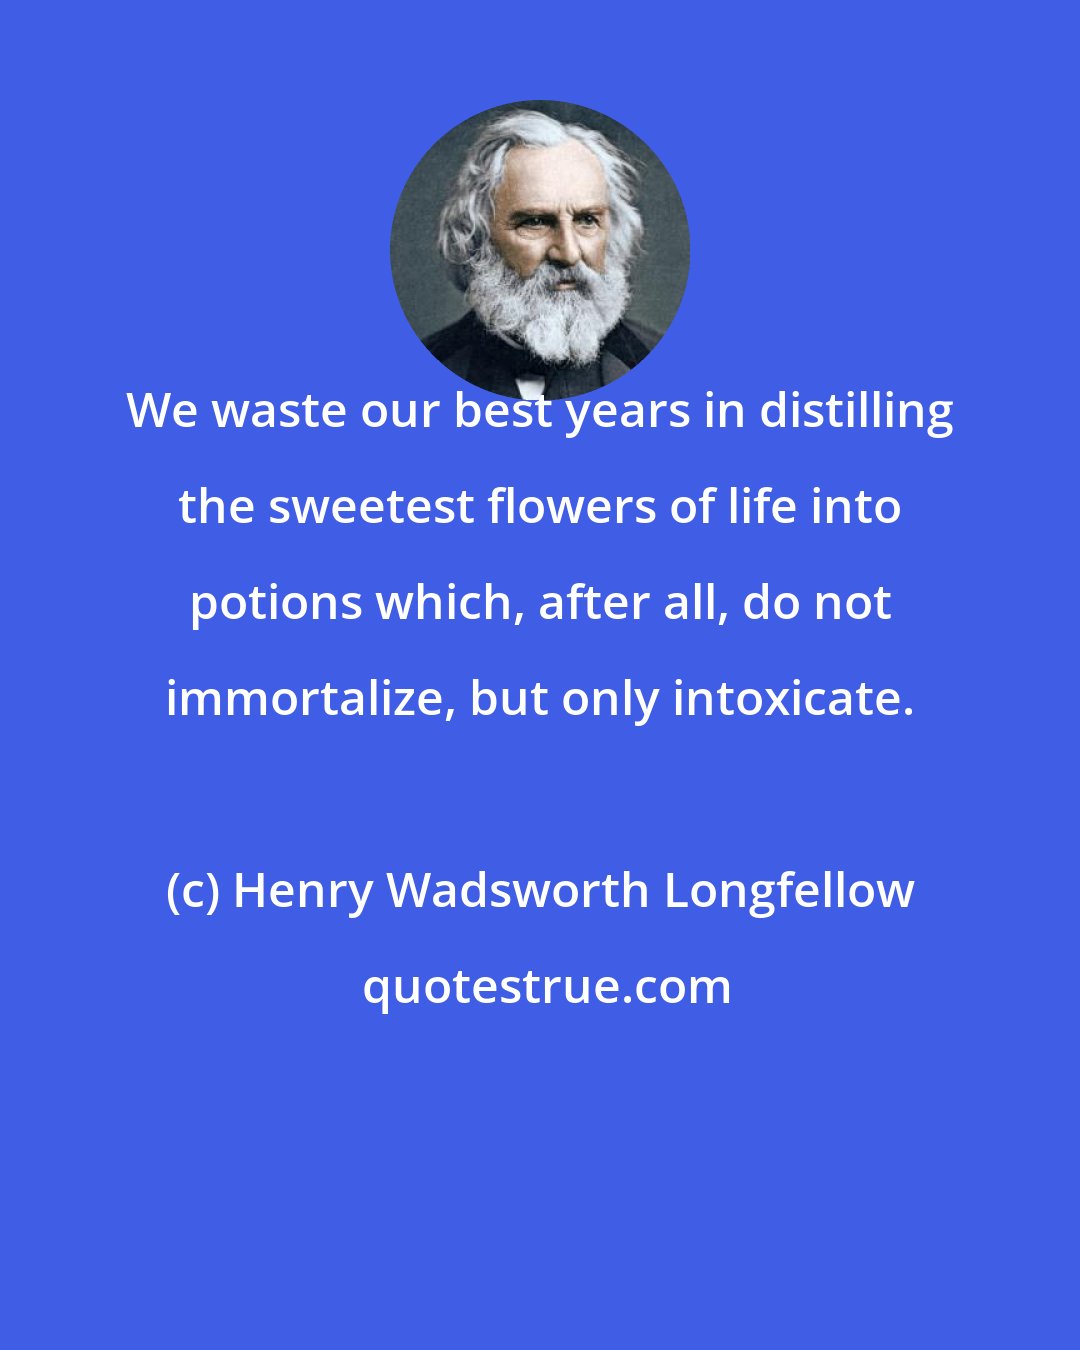 Henry Wadsworth Longfellow: We waste our best years in distilling the sweetest flowers of life into potions which, after all, do not immortalize, but only intoxicate.